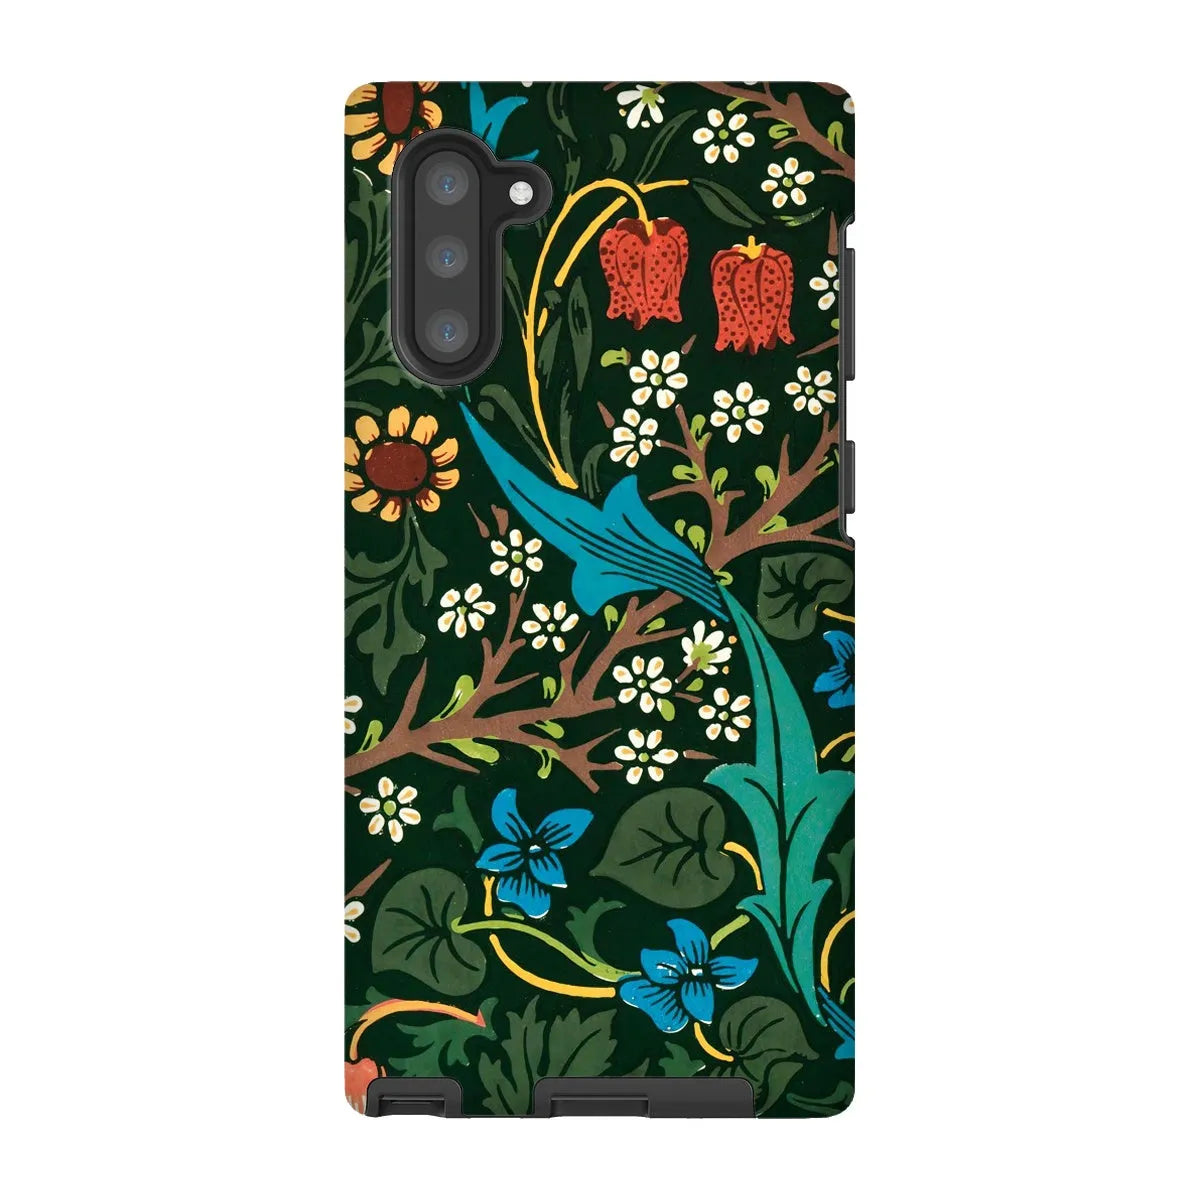 Blackthorn Hawthorn - Floral Phone Case - William Morris - Samsung Galaxy Note 10 / Matte - Mobile Phone Cases